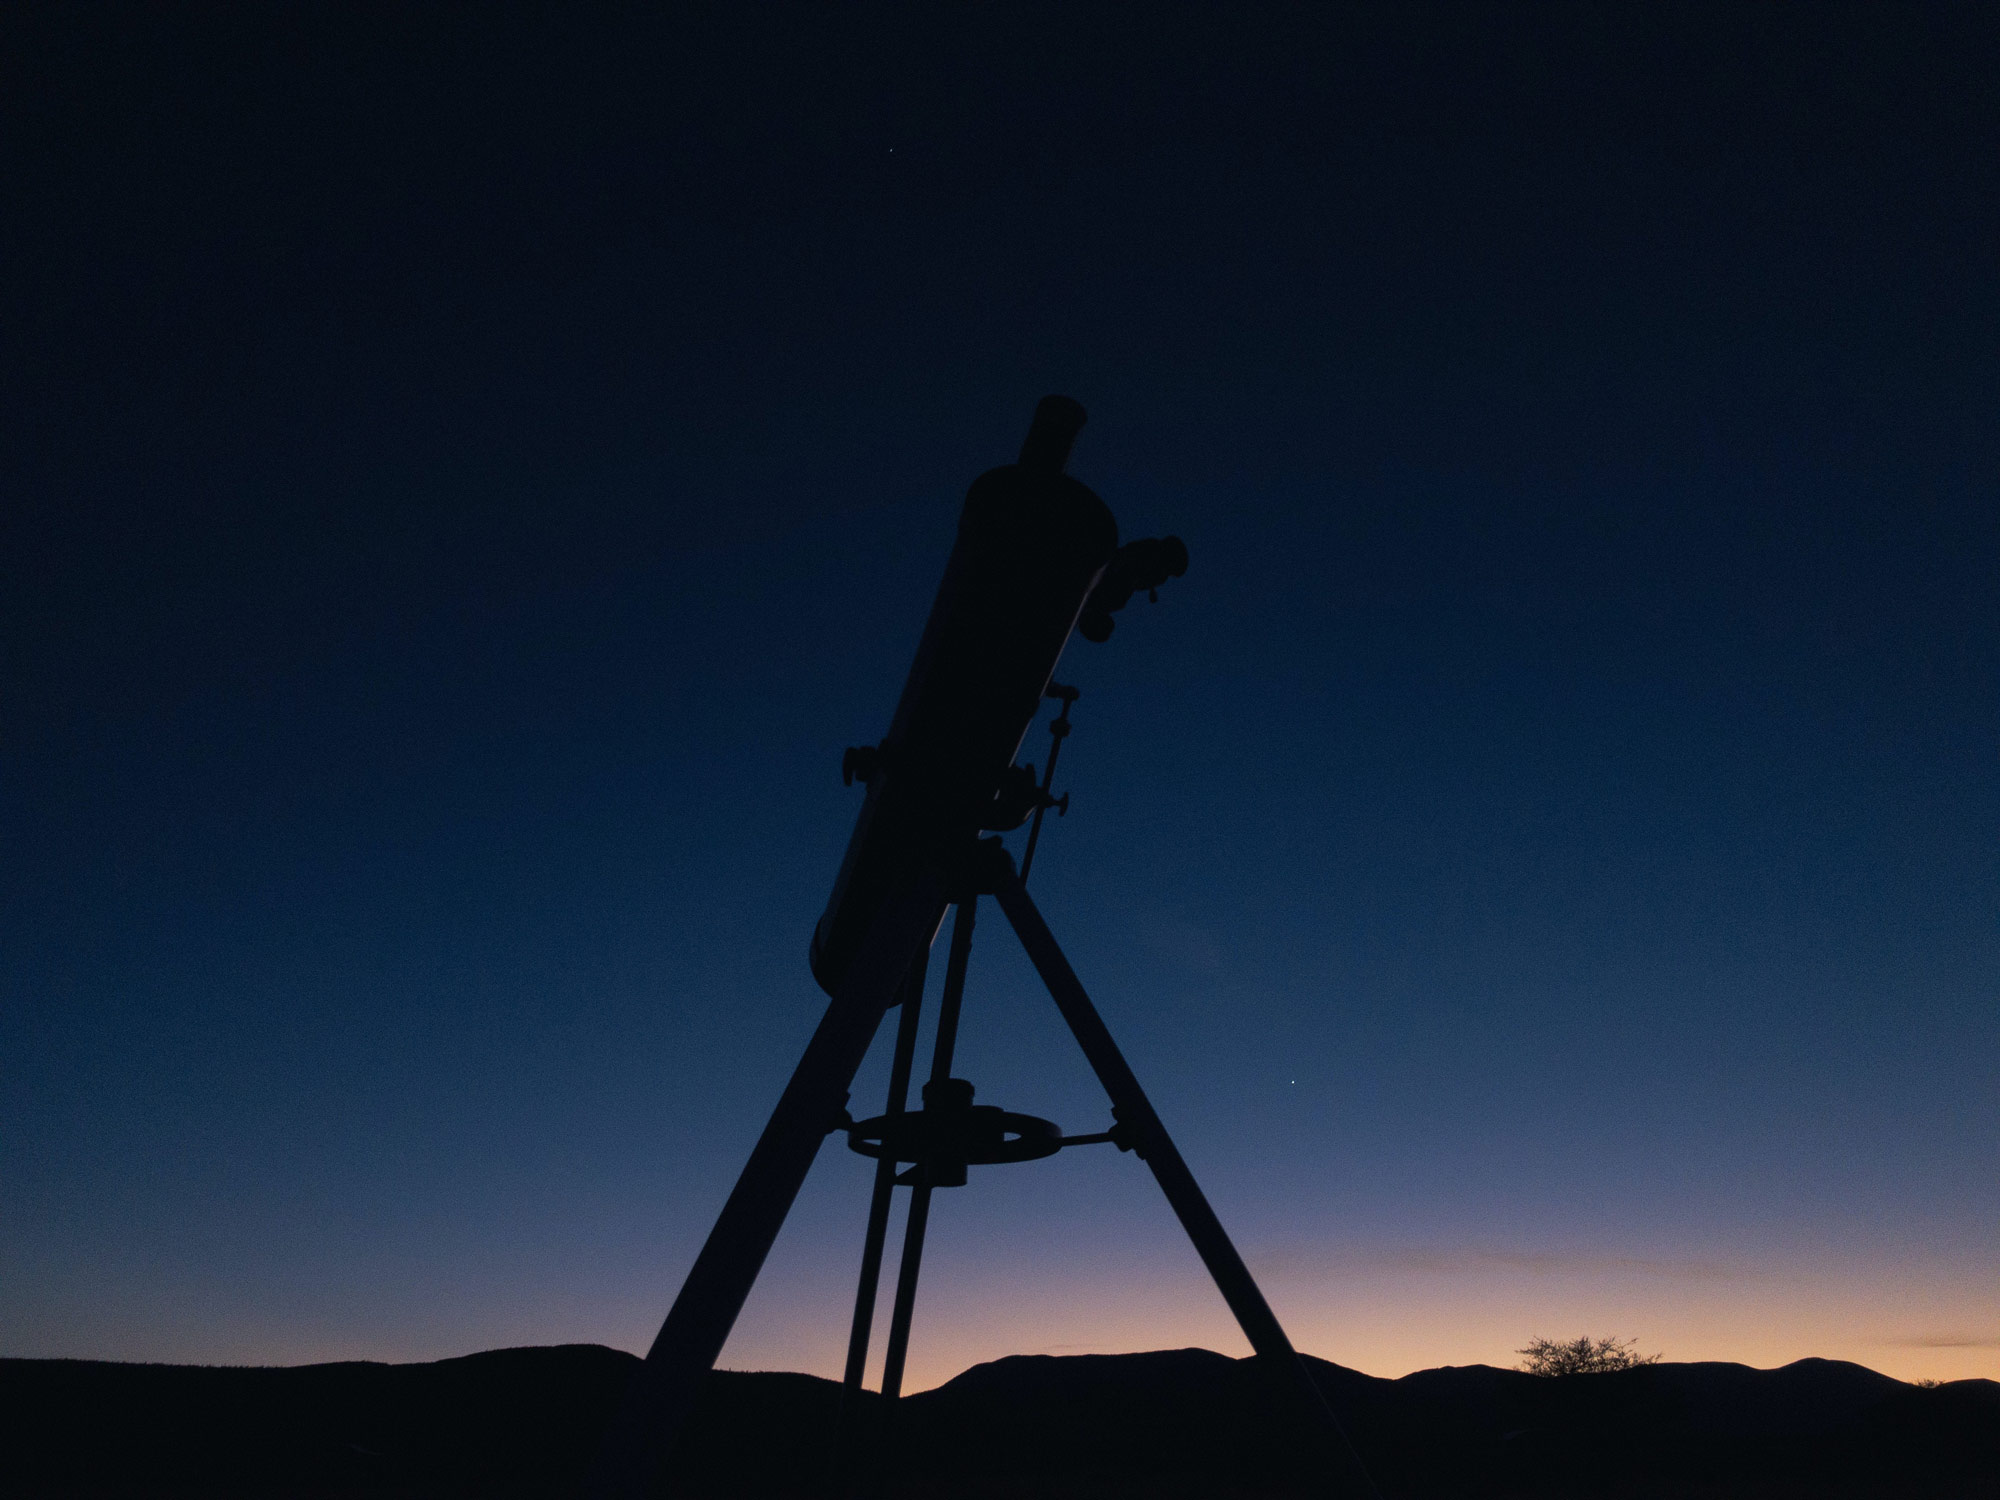 Explore astronomy over two nights! Learn what to expect from firsthand views of planets, star clusters, nebulae, and (if we’re lucky) a galaxy or two.